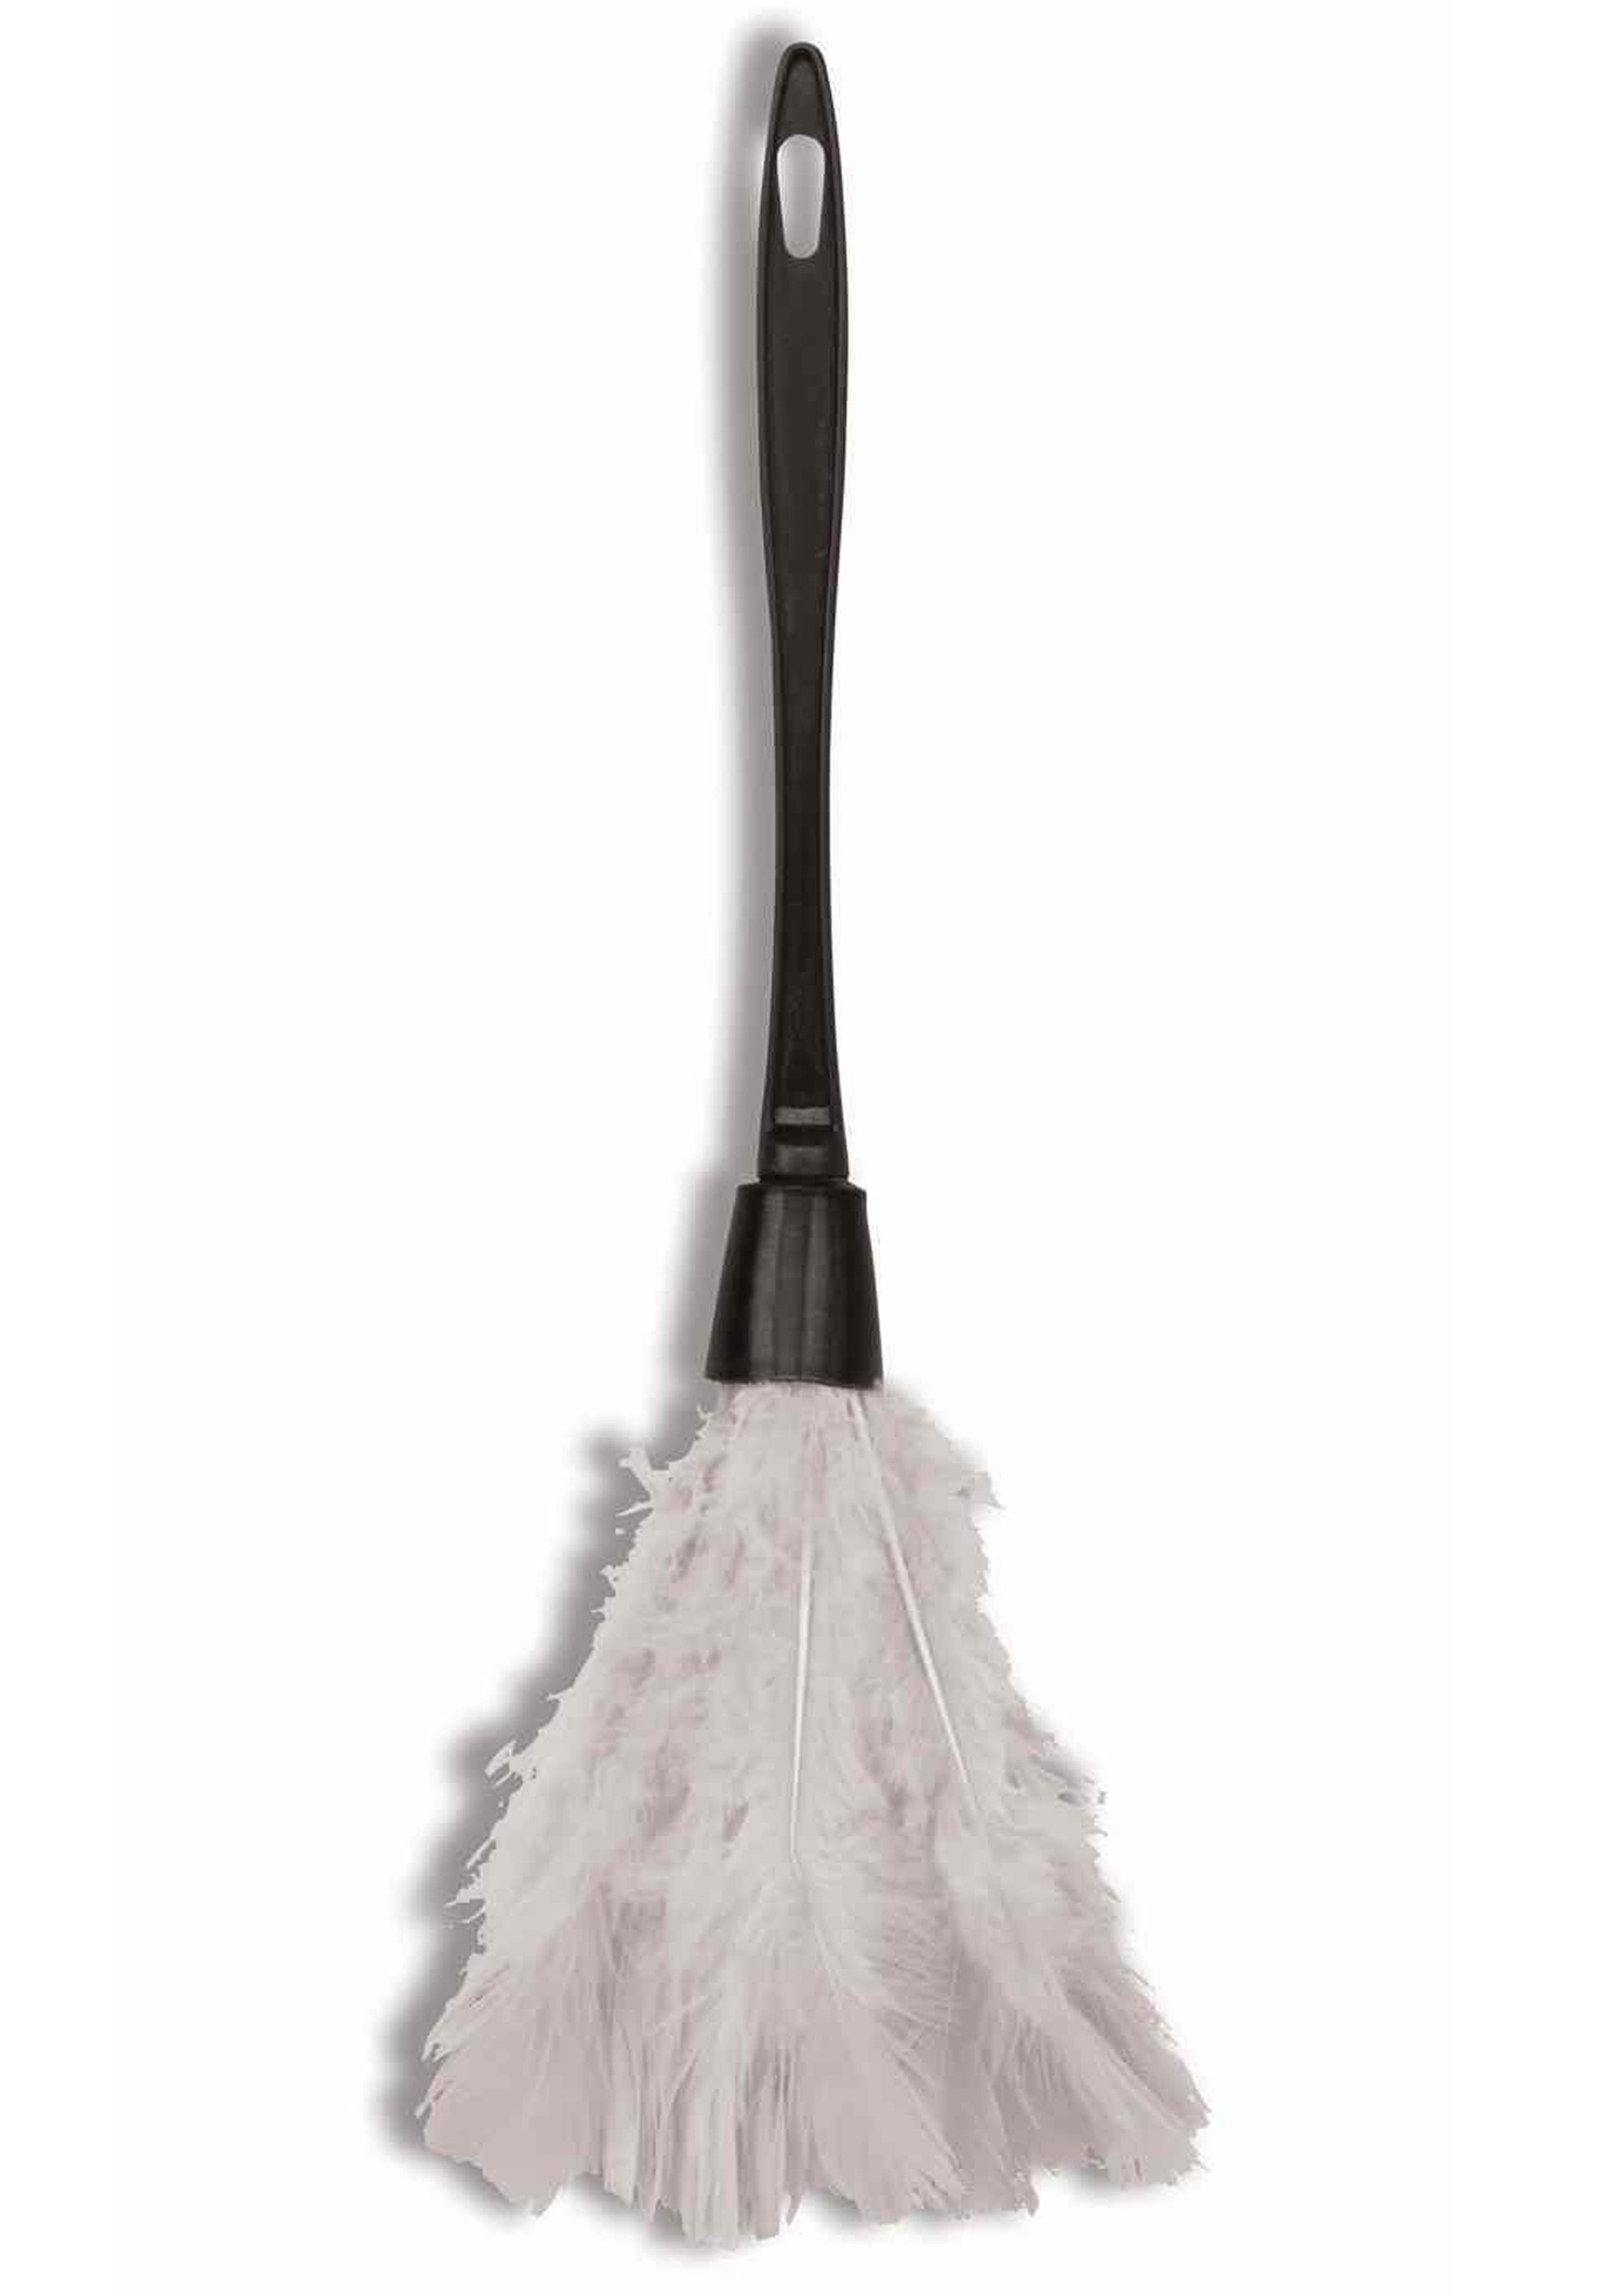 French House Maid Feather Duster Halloween Costume Accessory Prop NEW 